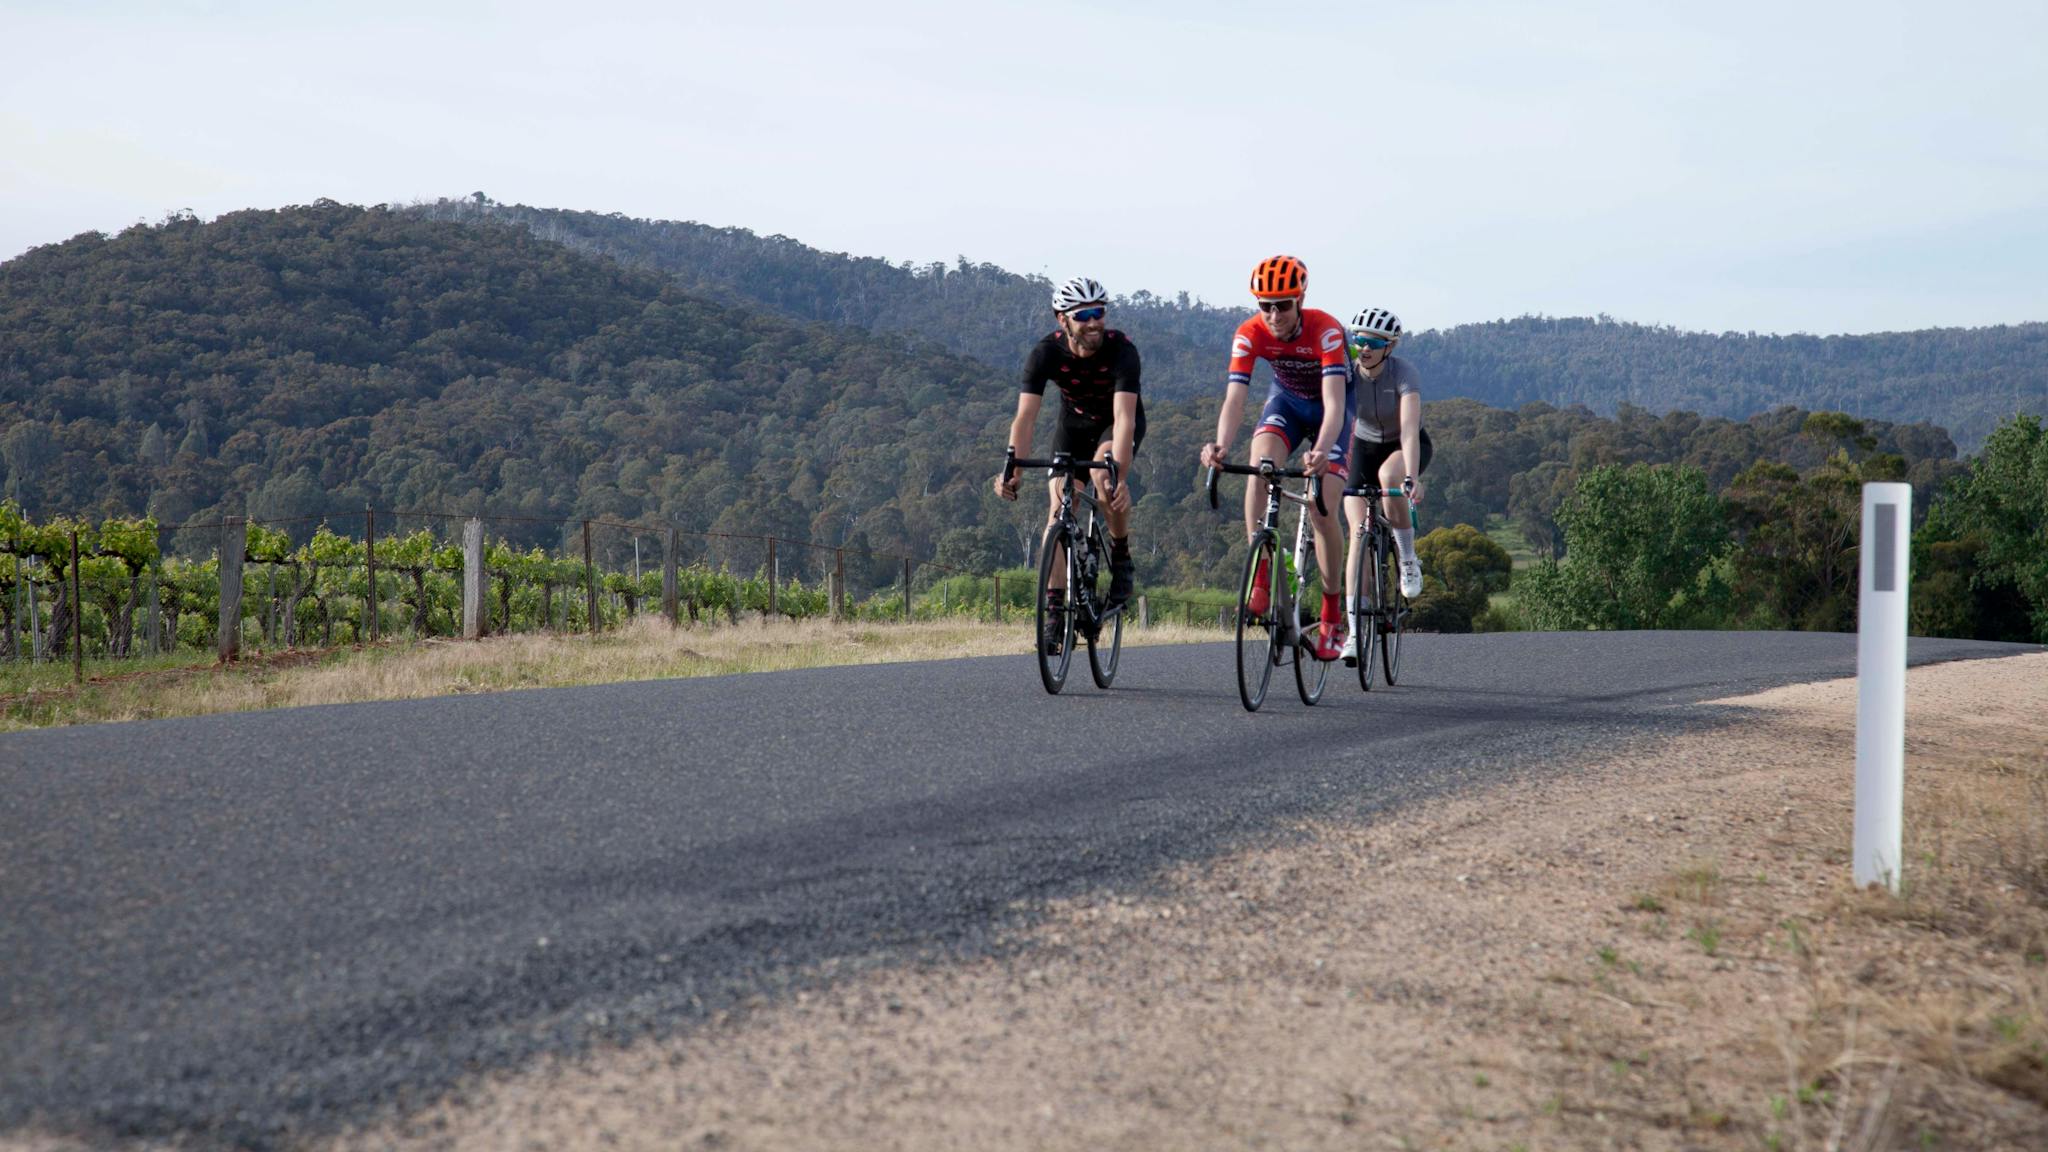 cyclists riding on the road vineyards and hills in the back ground